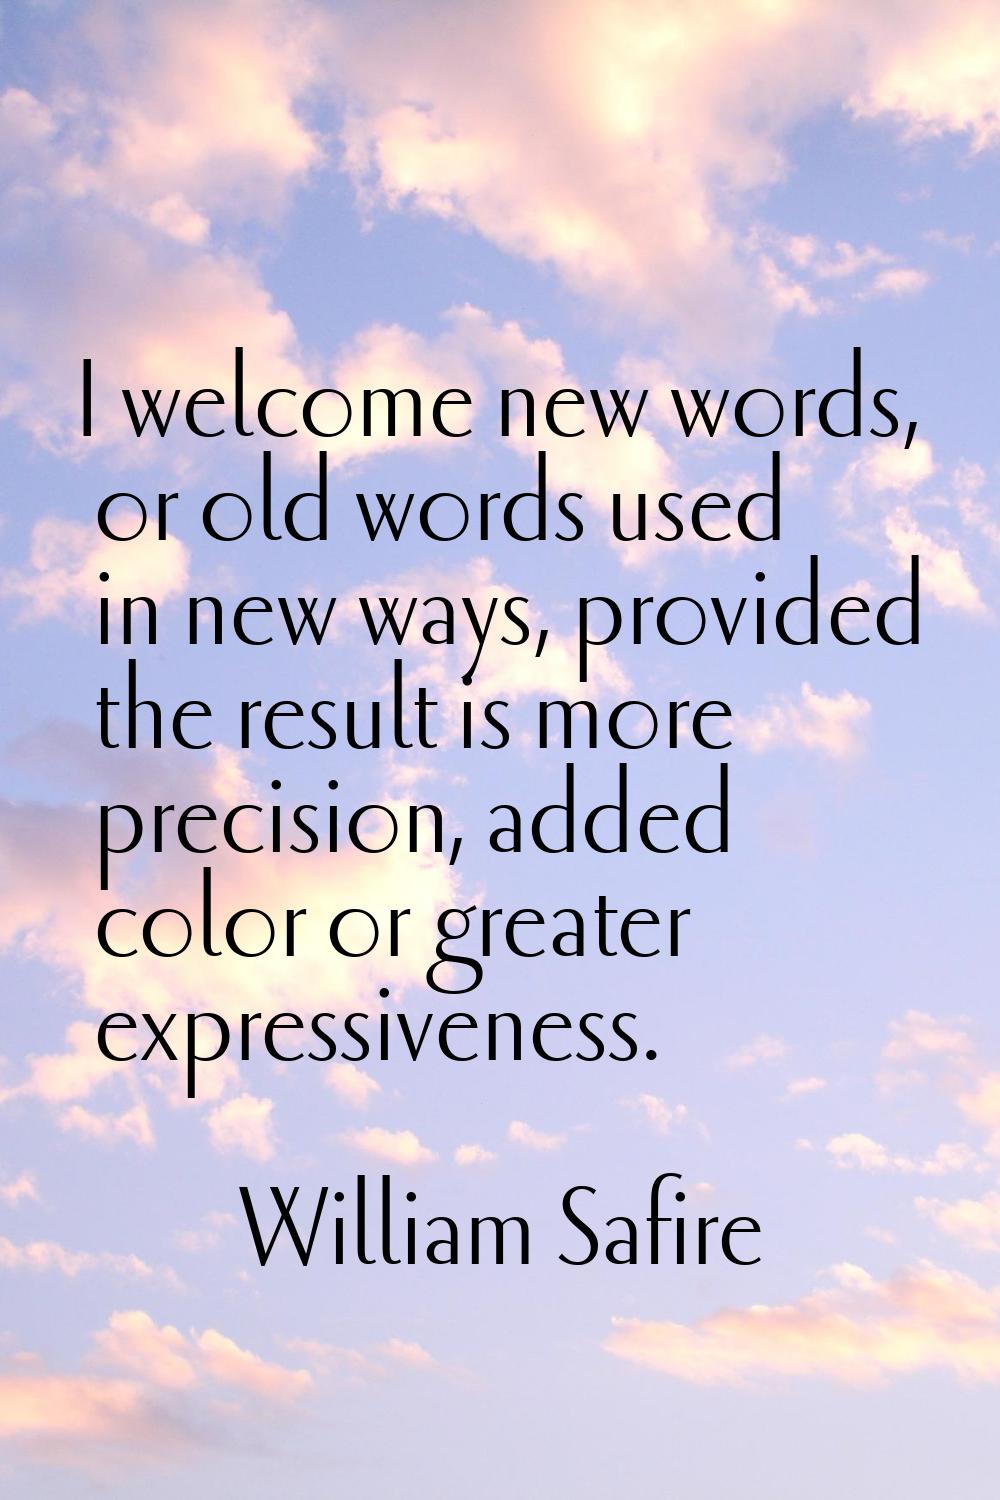 I welcome new words, or old words used in new ways, provided the result is more precision, added co